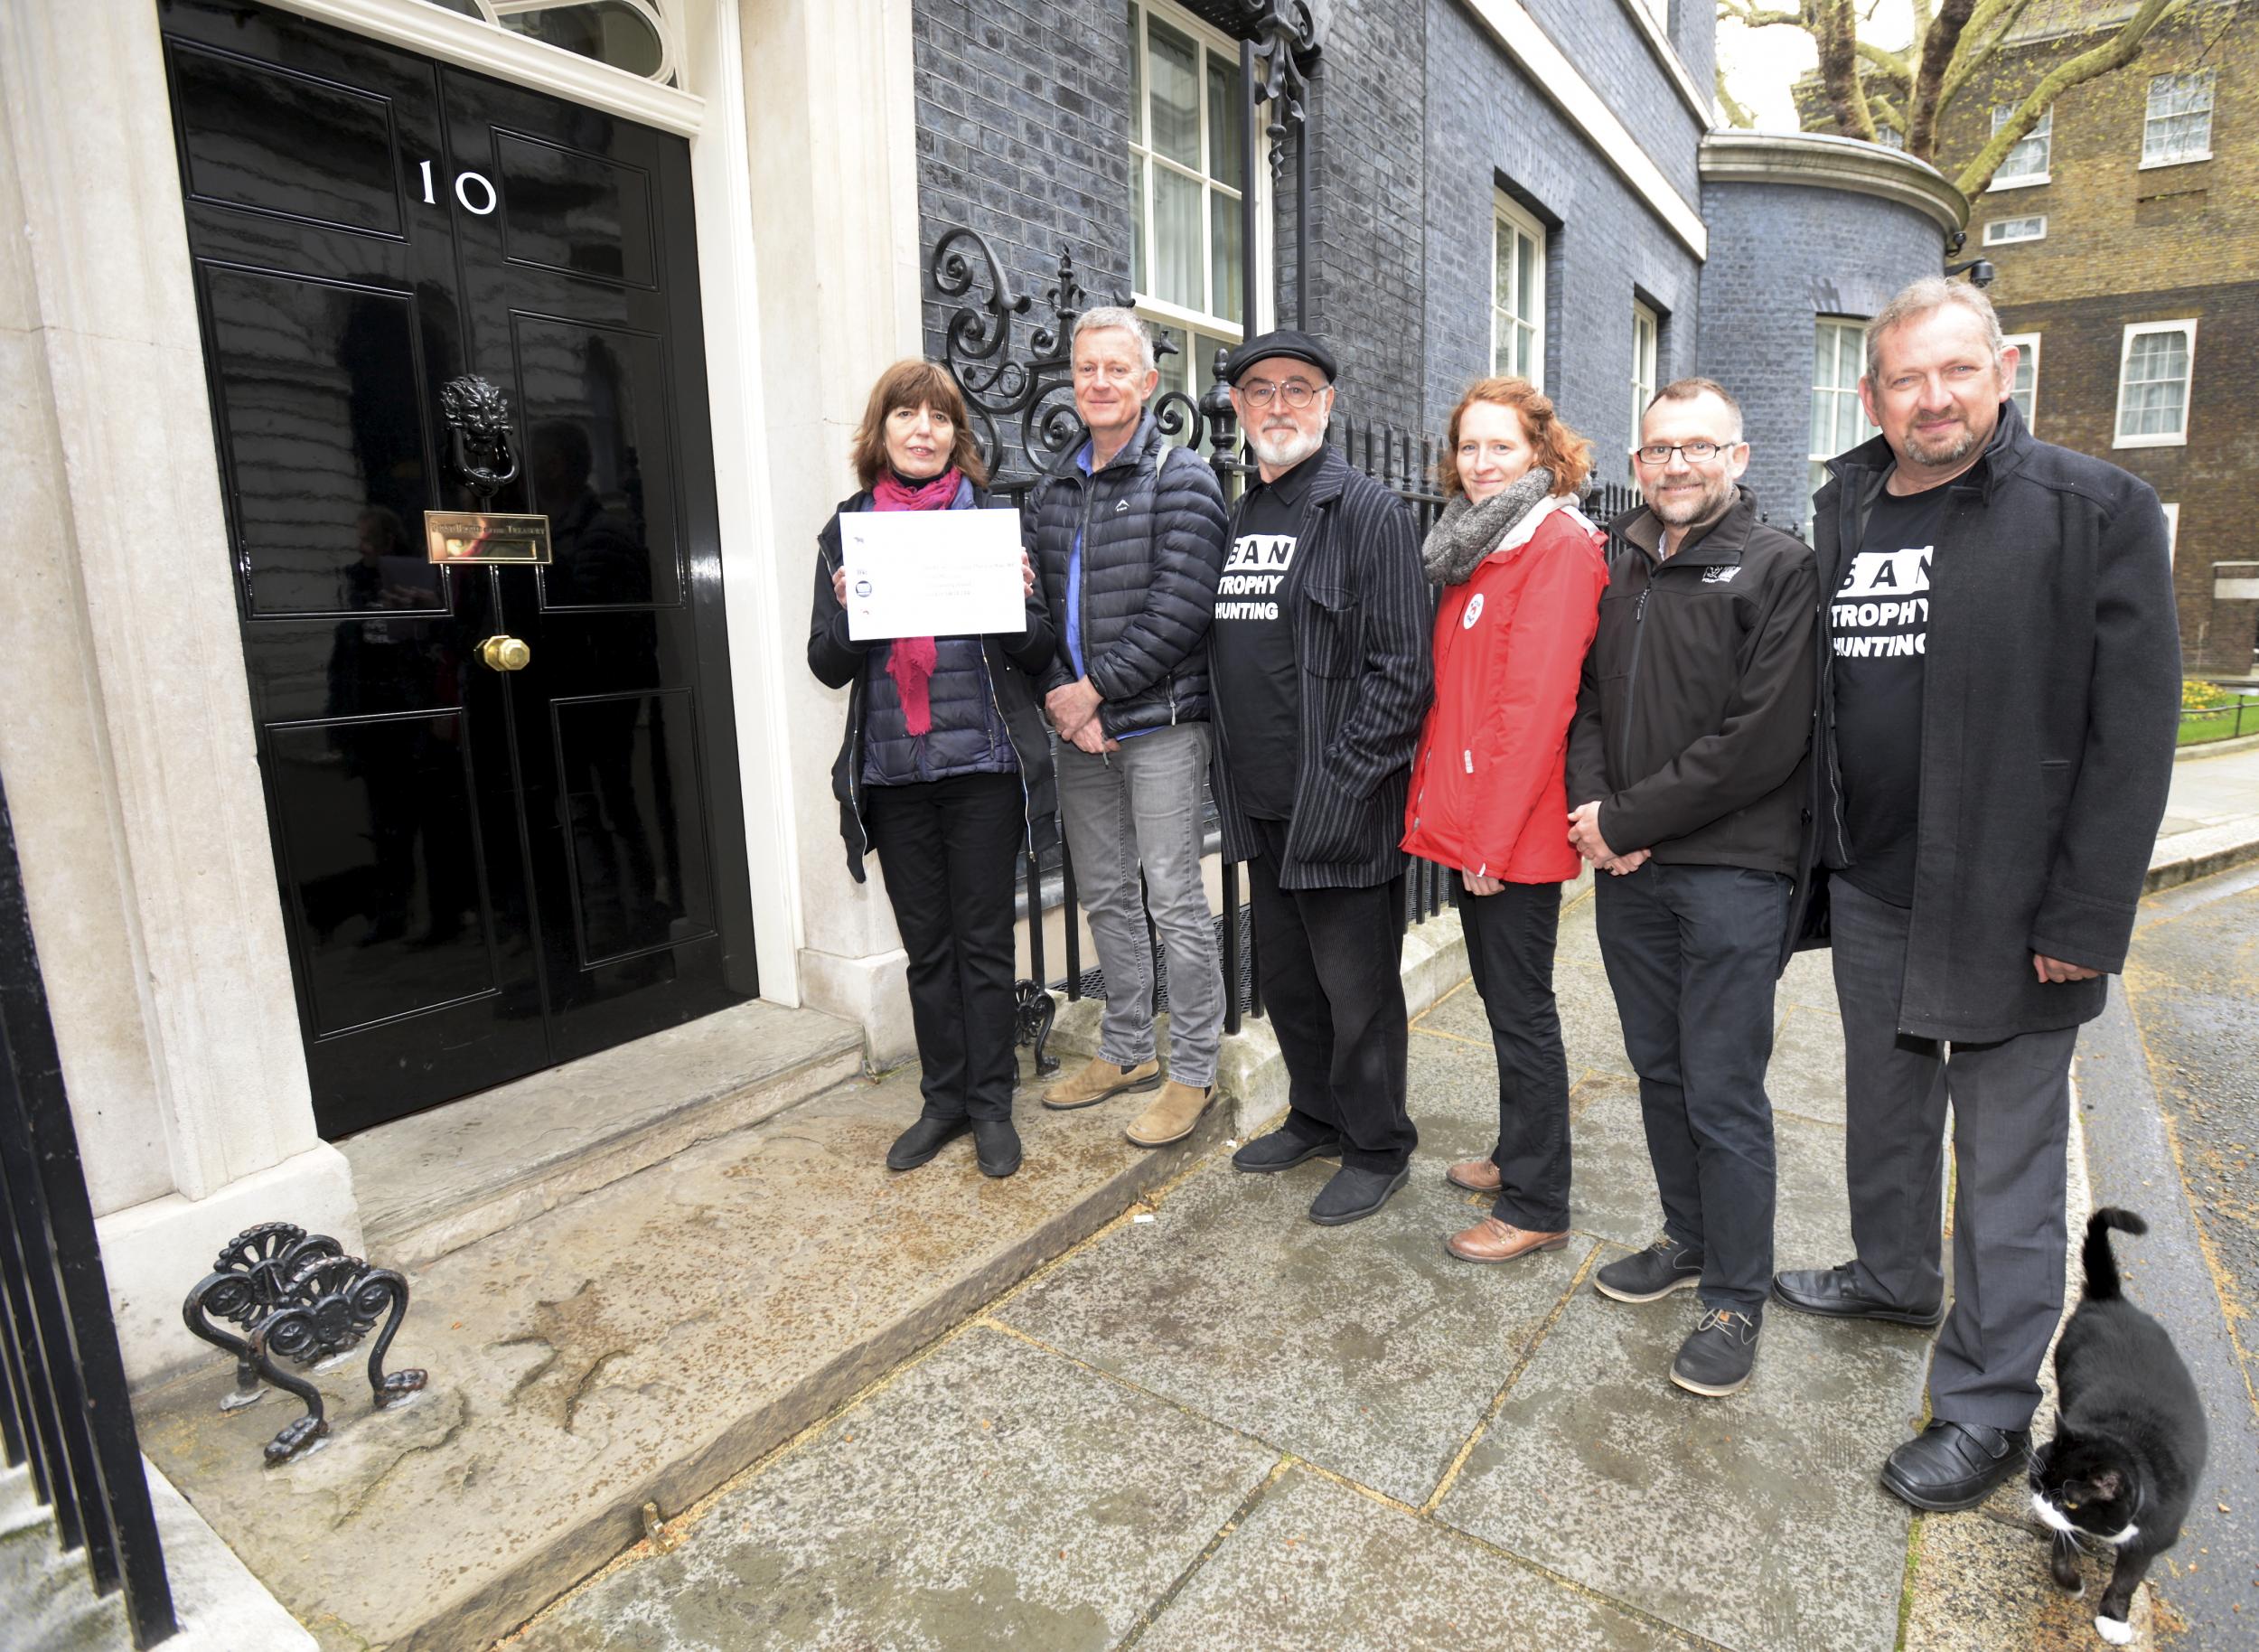 Campaigners have lobbied No 10 for years for a ban